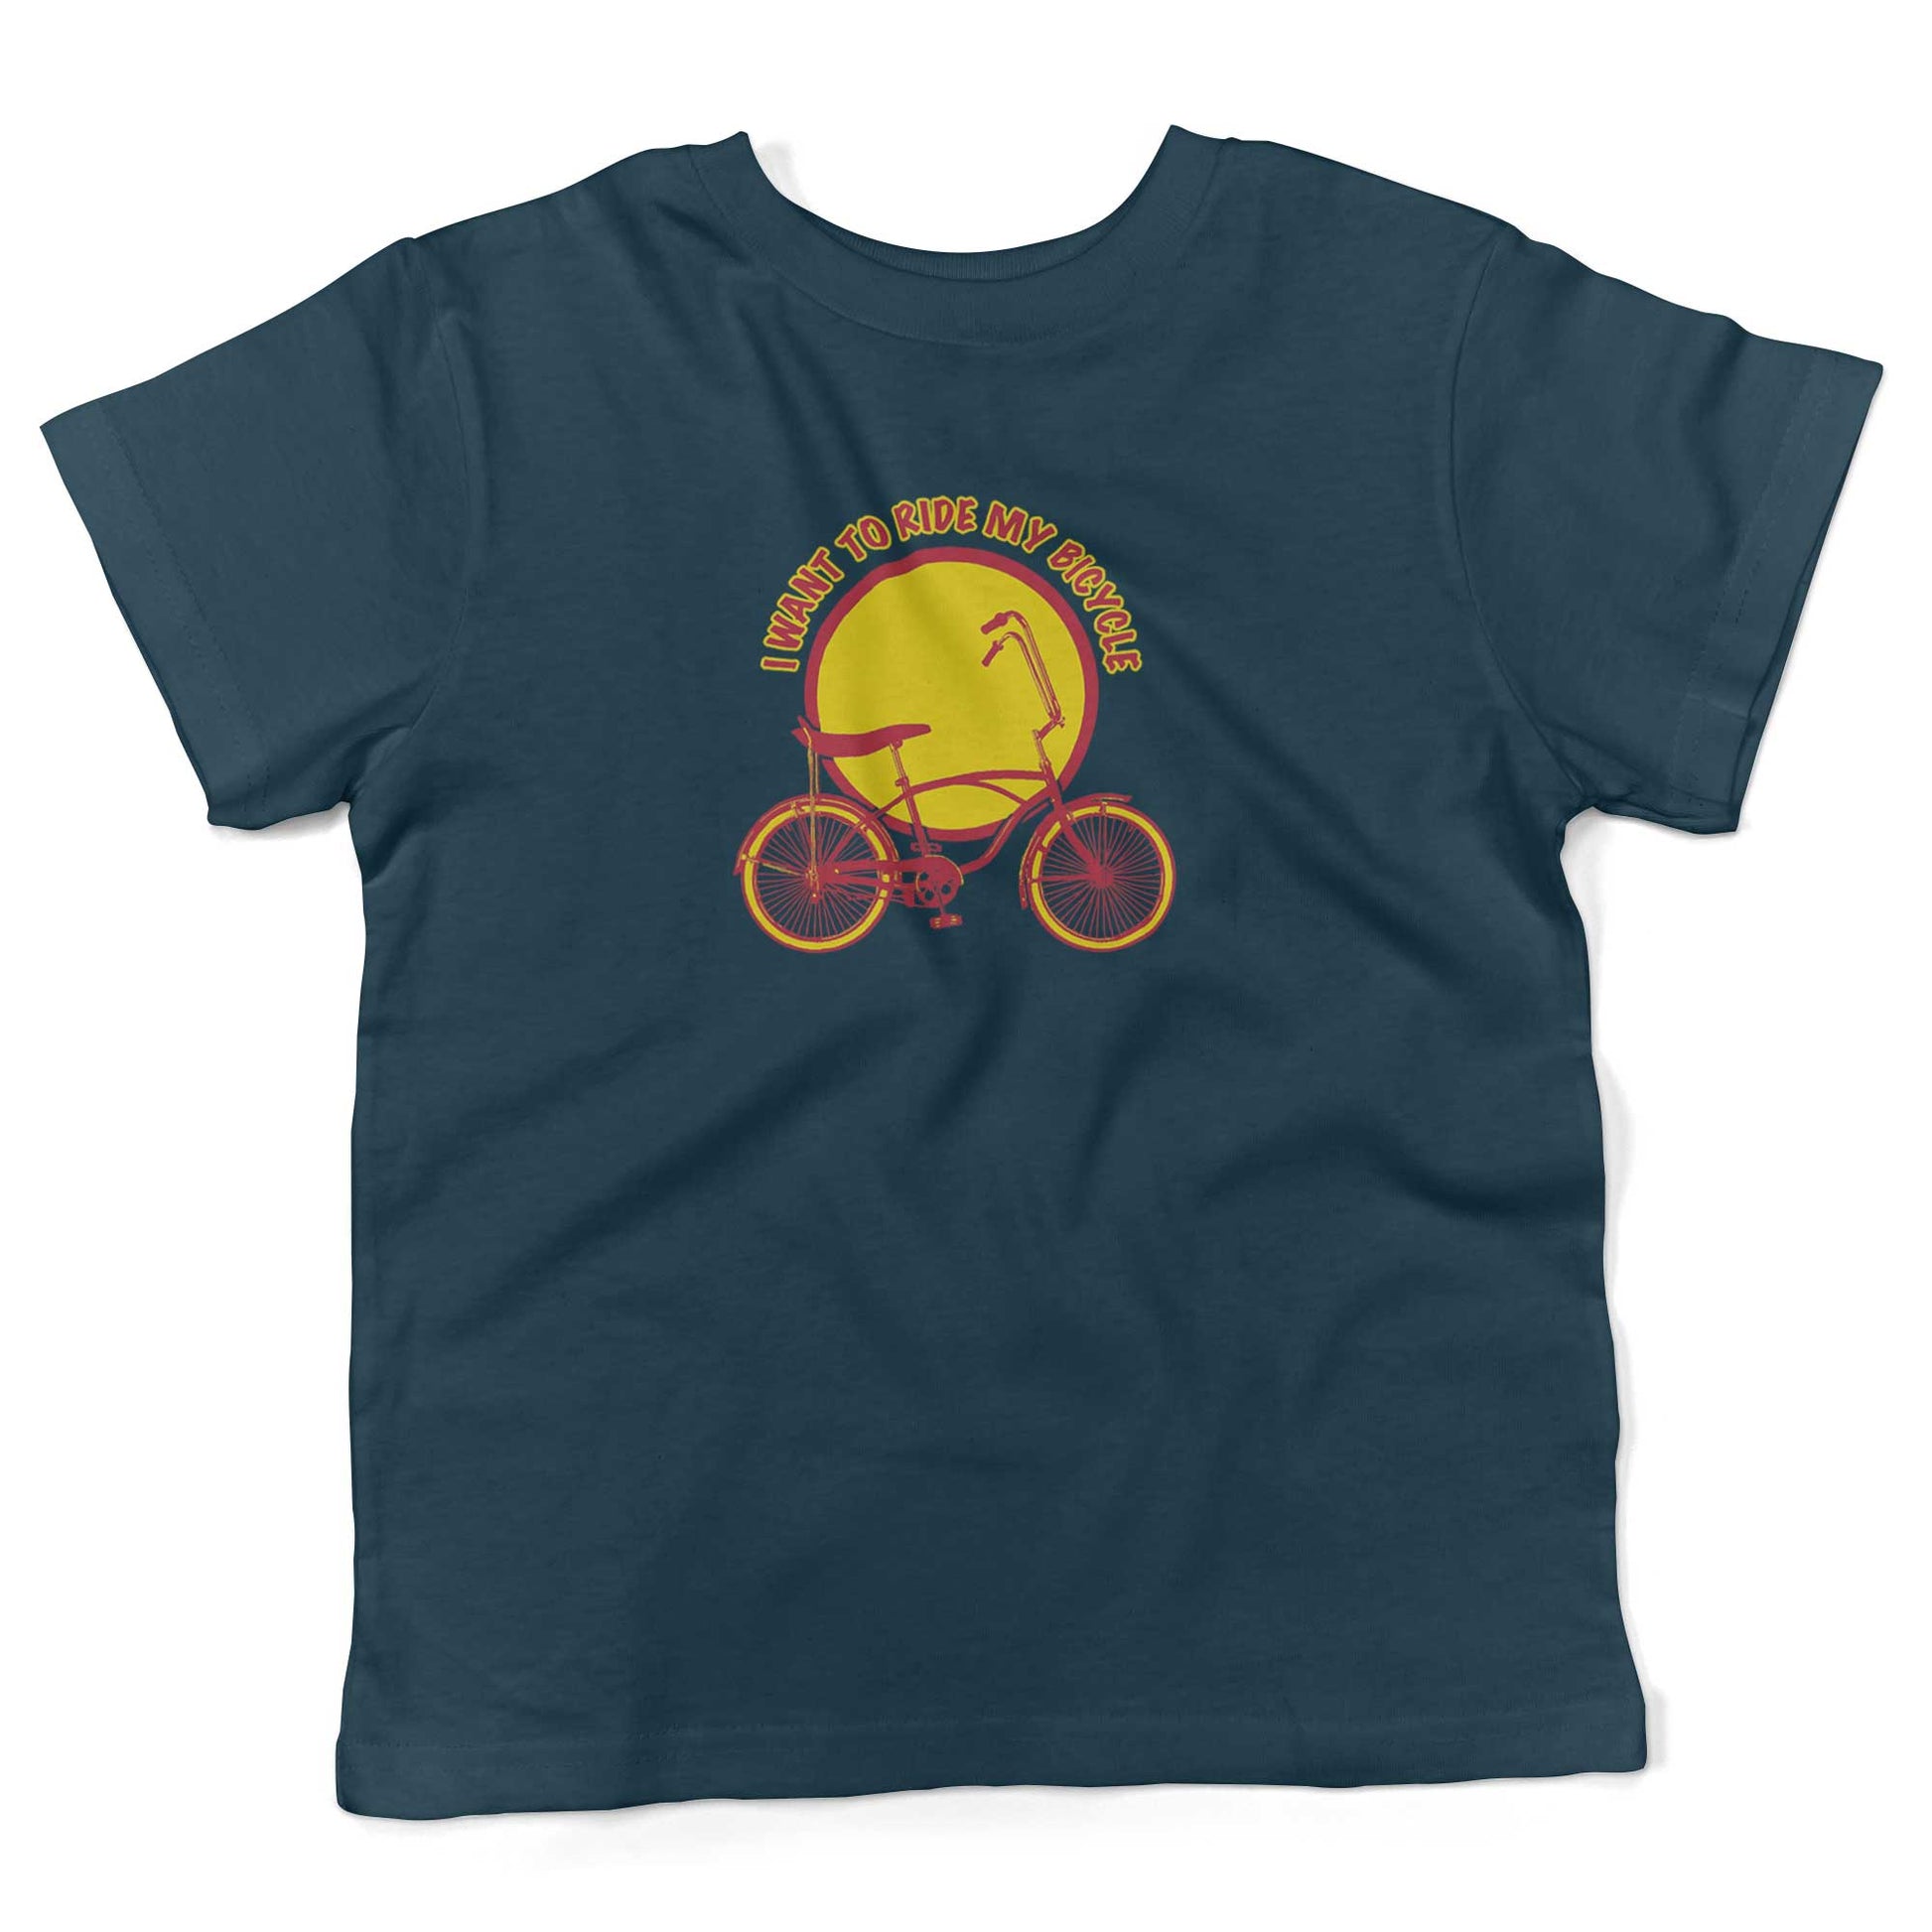 I Want To Ride My Bicycle Toddler Shirt-Organic Pacific Blue-2T